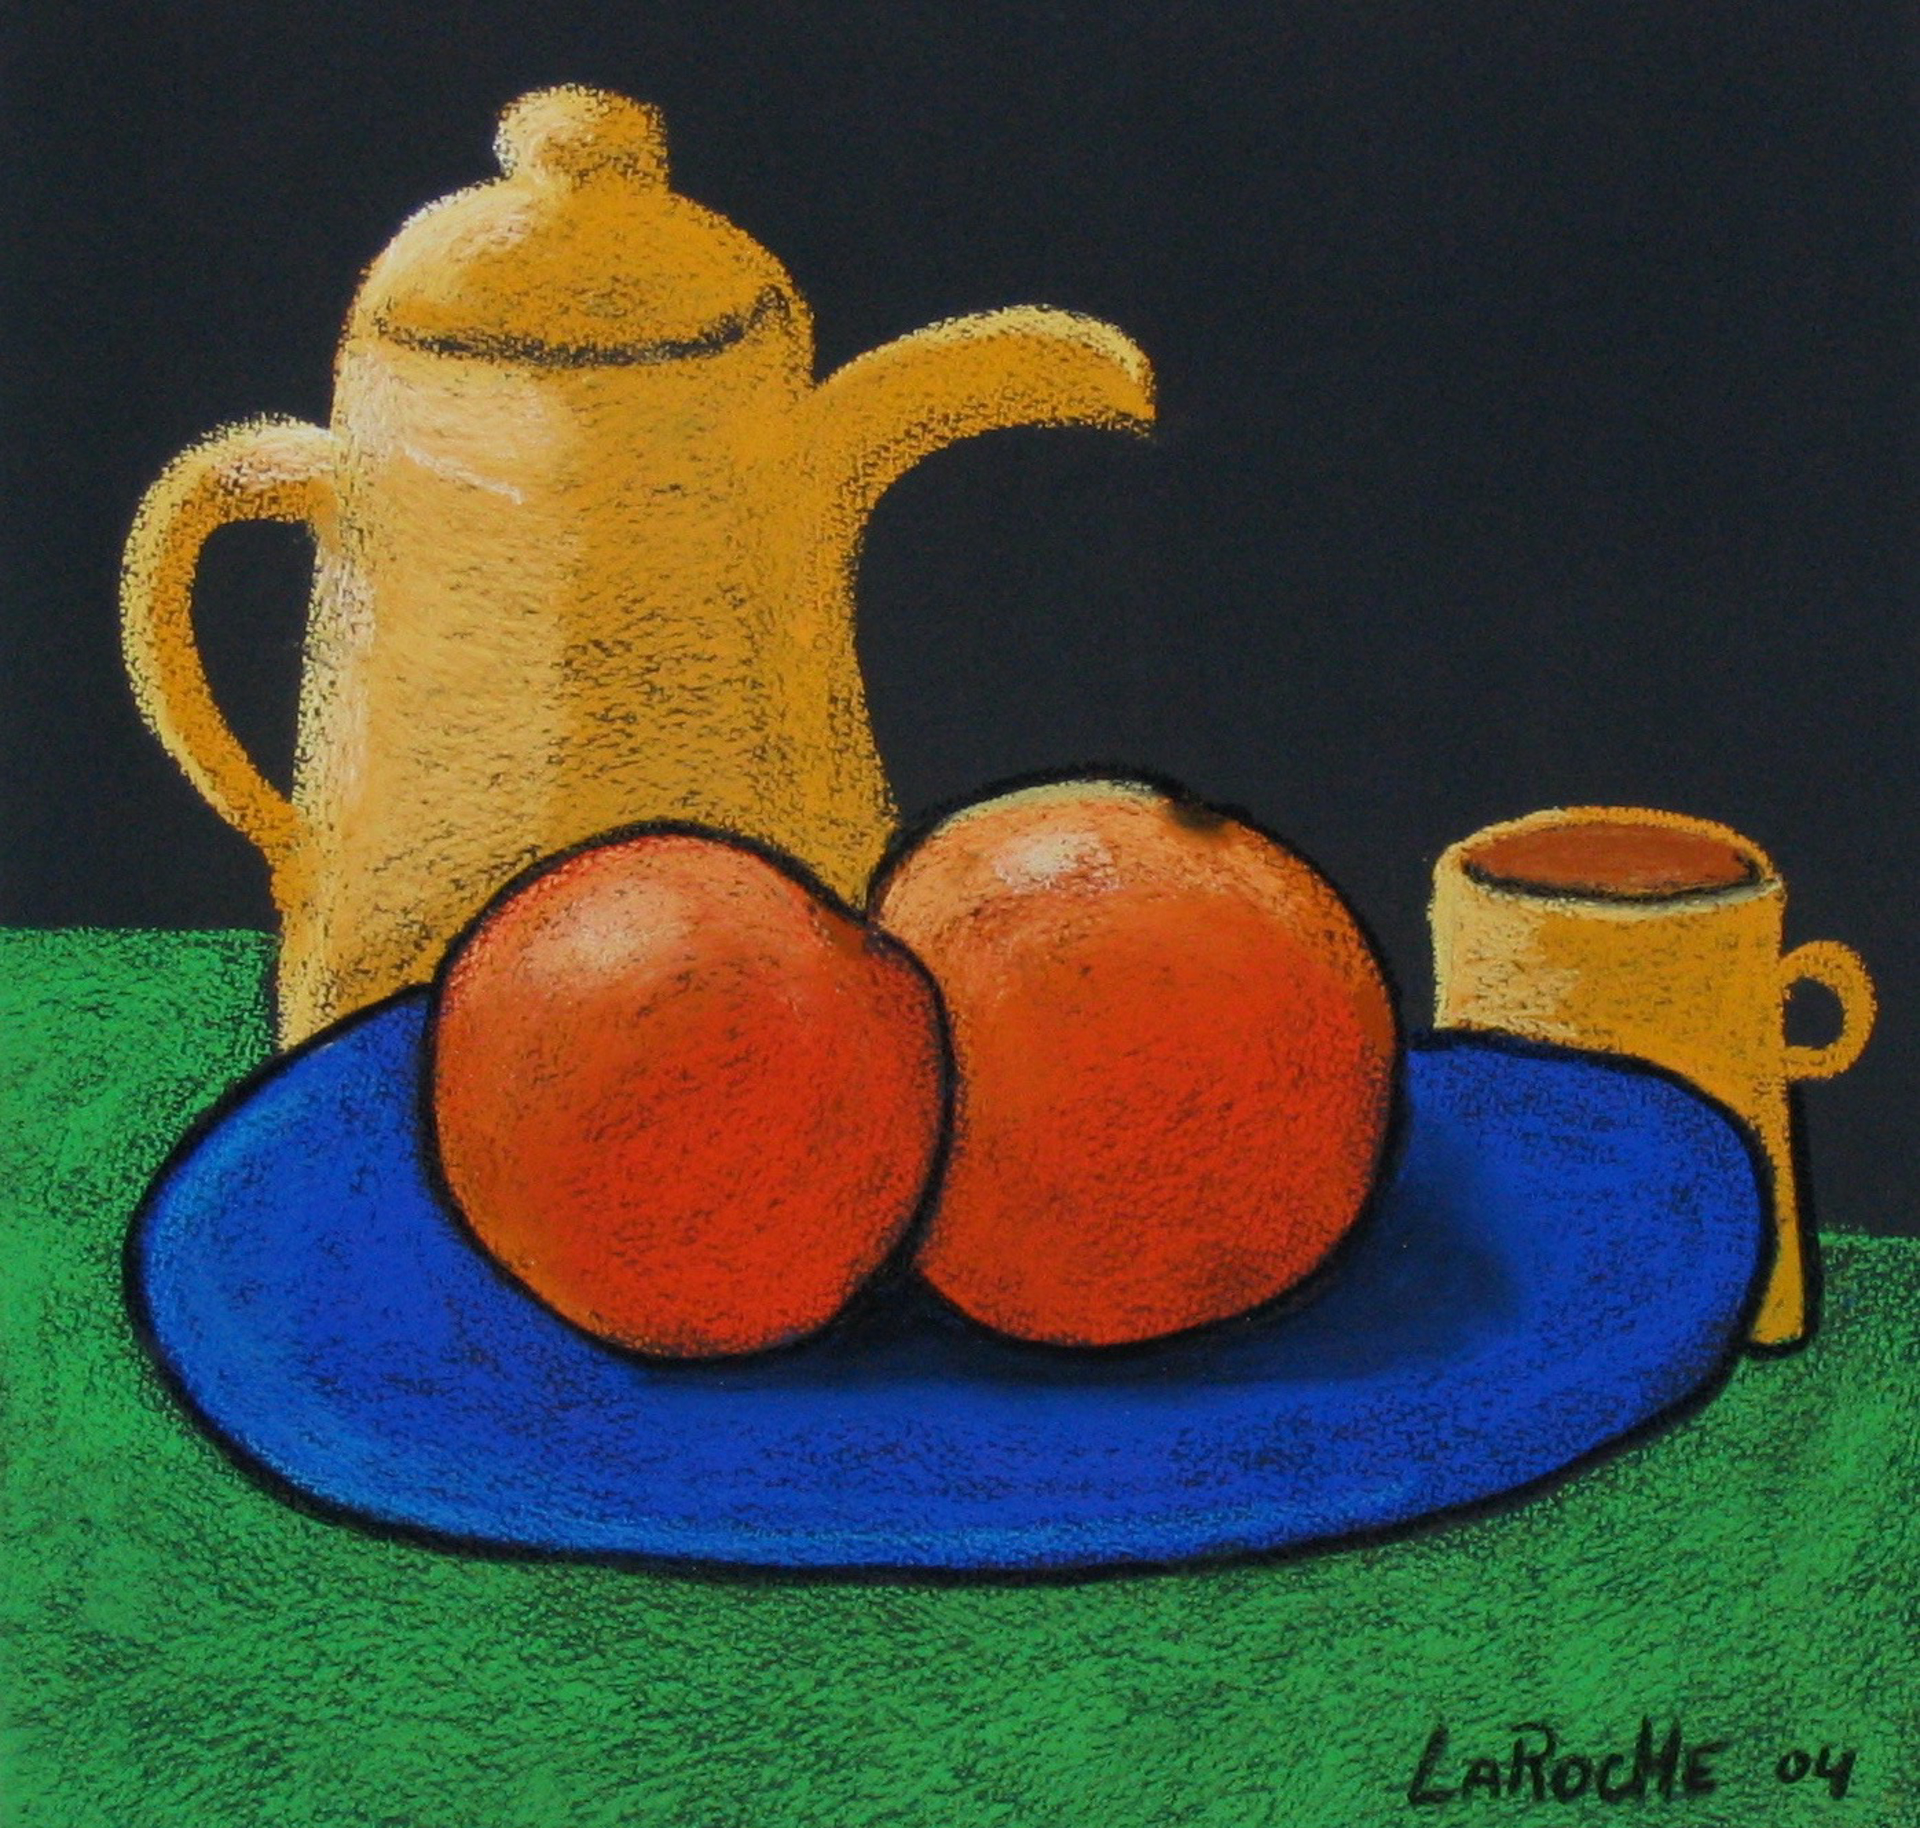 Coffee and Oranges -SOLD available for commission by Carole LaRoche